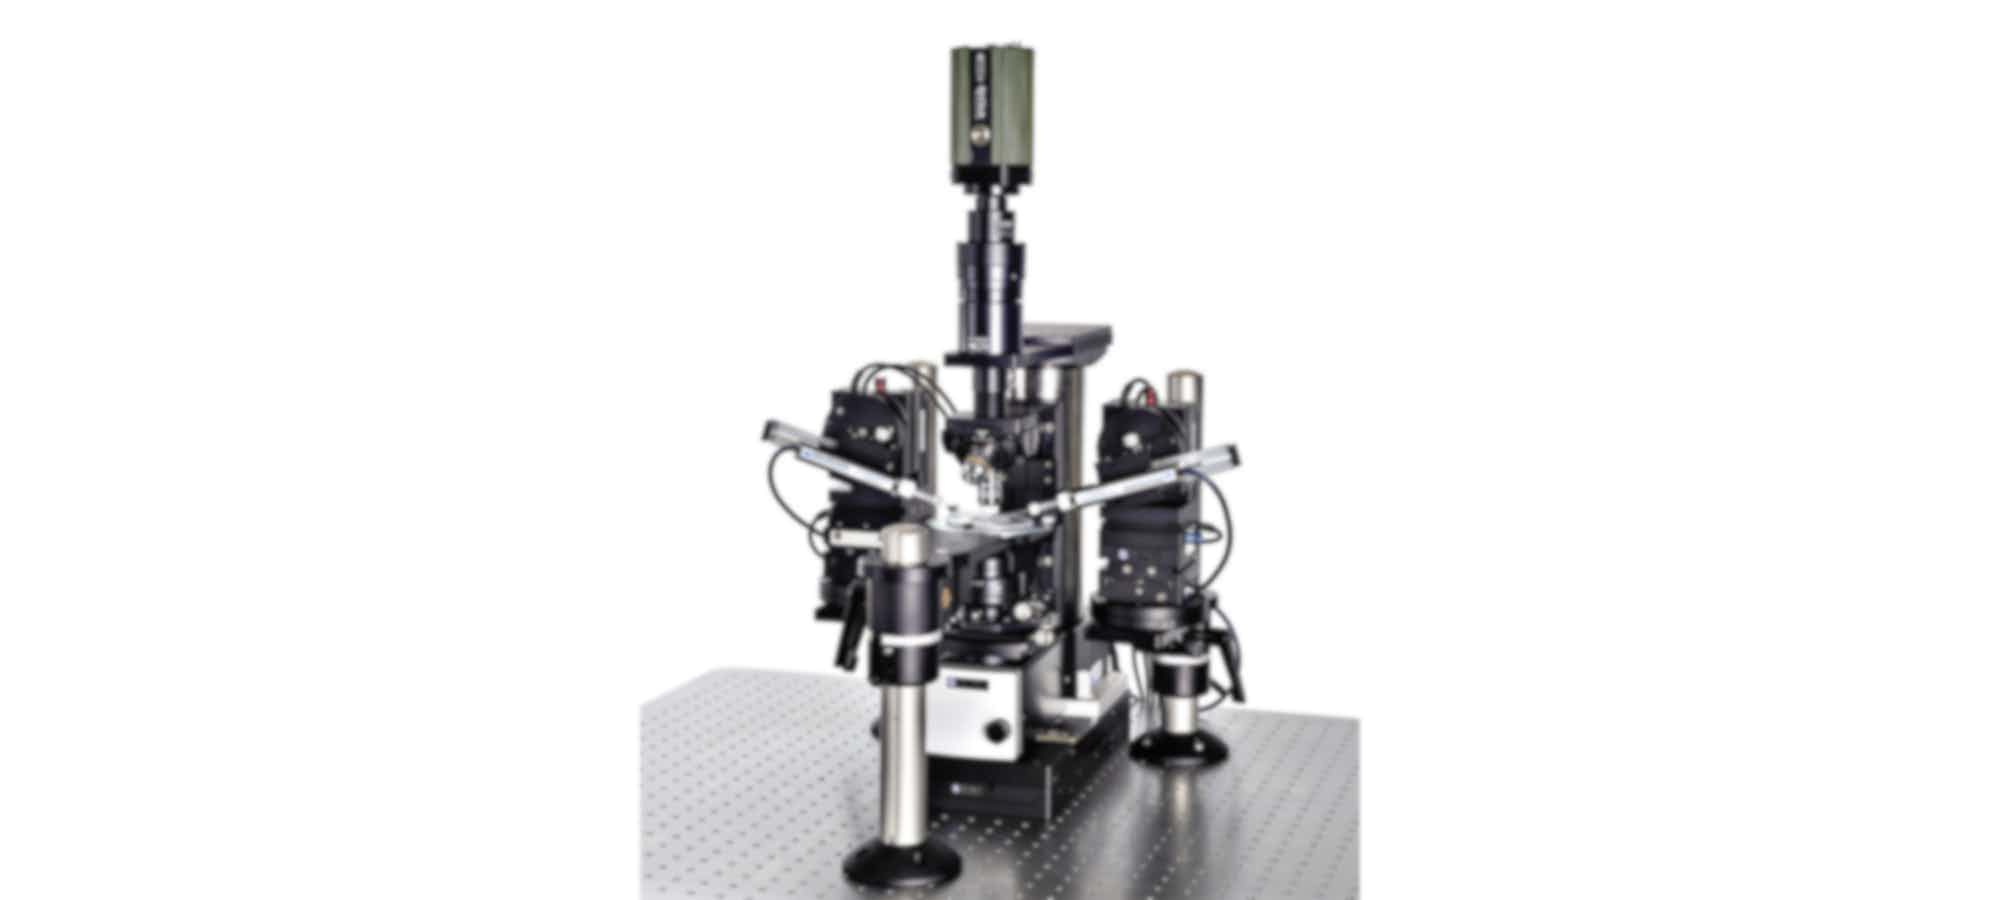 Integrated electrophysiology system for patch clamp recordings